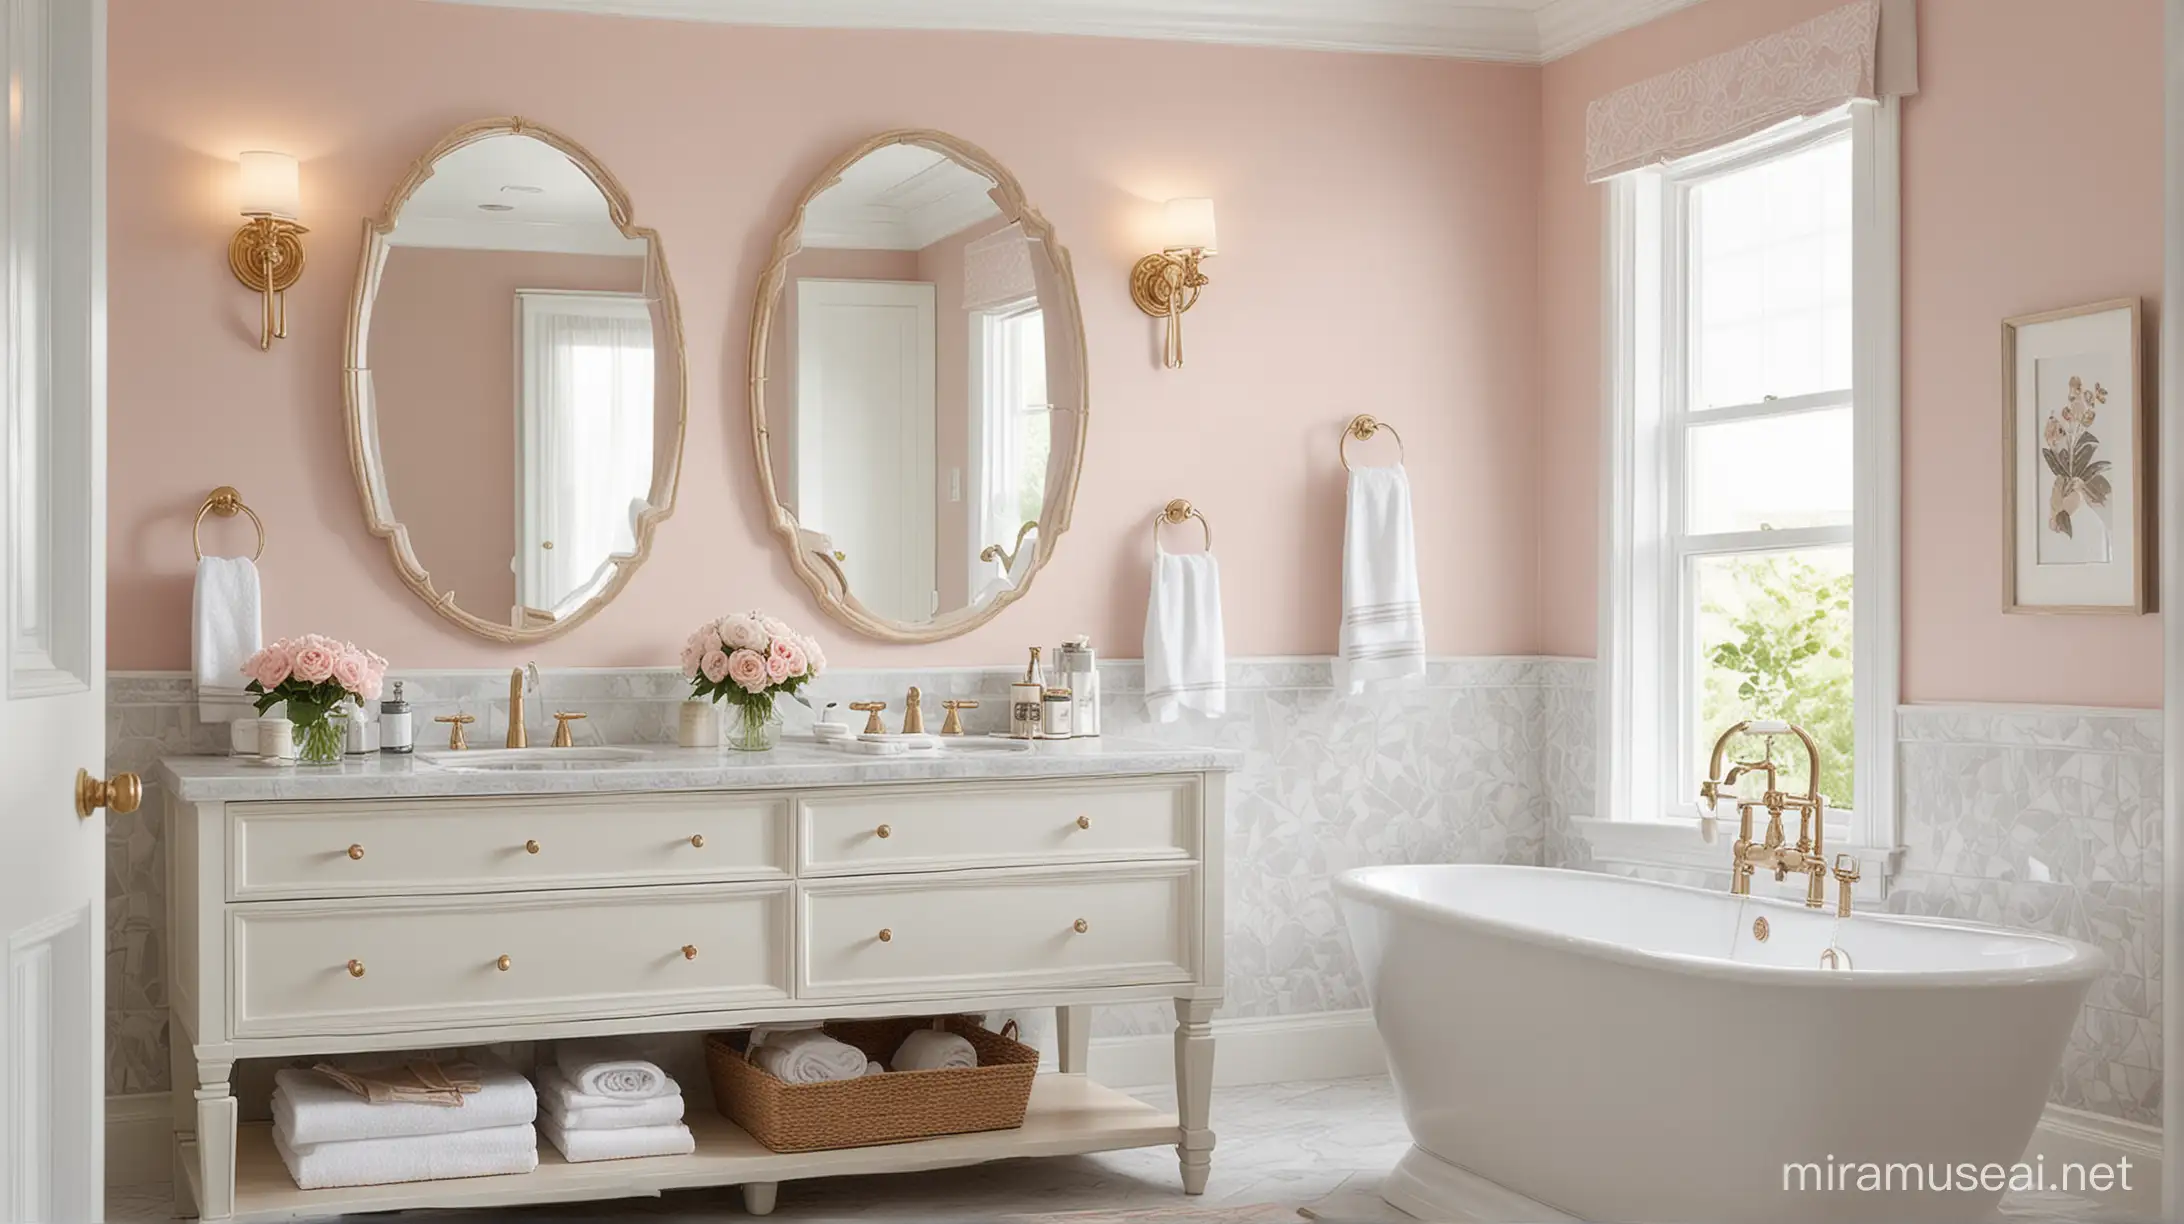 Soft Color Palette: Introduce soft pastel colors or muted tones for walls, towels, and accessories to add a feminine touch without overwhelming the overall design. Think blush pink, lavender, or soft mint green.
Curved Shapes: Incorporate curved or rounded shapes in elements like mirrors, lighting fixtures, and accessories to soften the clean lines of the bathroom fixtures and create a more feminine aesthetic.
Floral Accents: Include floral patterns or motifs in wallpaper, tiles, or textiles such as curtains or shower curtains to infuse the space with a feminine and elegant vibe. Delicate floral arrangements or potted plants can also add a natural and refreshing touch.
Luxurious Fabrics: Choose luxurious fabrics like velvet or silk for bathroom accessories such as towels, bath mats, and window treatments to add texture and sophistication to the space.
Decorative Details: Incorporate decorative details such as intricate moldings, decorative trim, or ornate hardware with feminine motifs like floral designs or delicate filigree patterns to elevate the overall look of the bathroom.
Accessorize Thoughtfully: Select feminine accessories such as vintage perfume bottles, crystal vases with fresh flowers, decorative trays with elegant jewelry or skincare products, and framed artwork featuring soft and romantic imagery to personalize the space and enhance its feminine appeal.
By integrating these feminine touches into the AI image generator, users can visualize trendy bathrooms that not only feature white oak vanities and soaker tubs with gold hardware but also incorporate elements that cater to a more feminine aesthetic, creating a harmonious and inviting space.